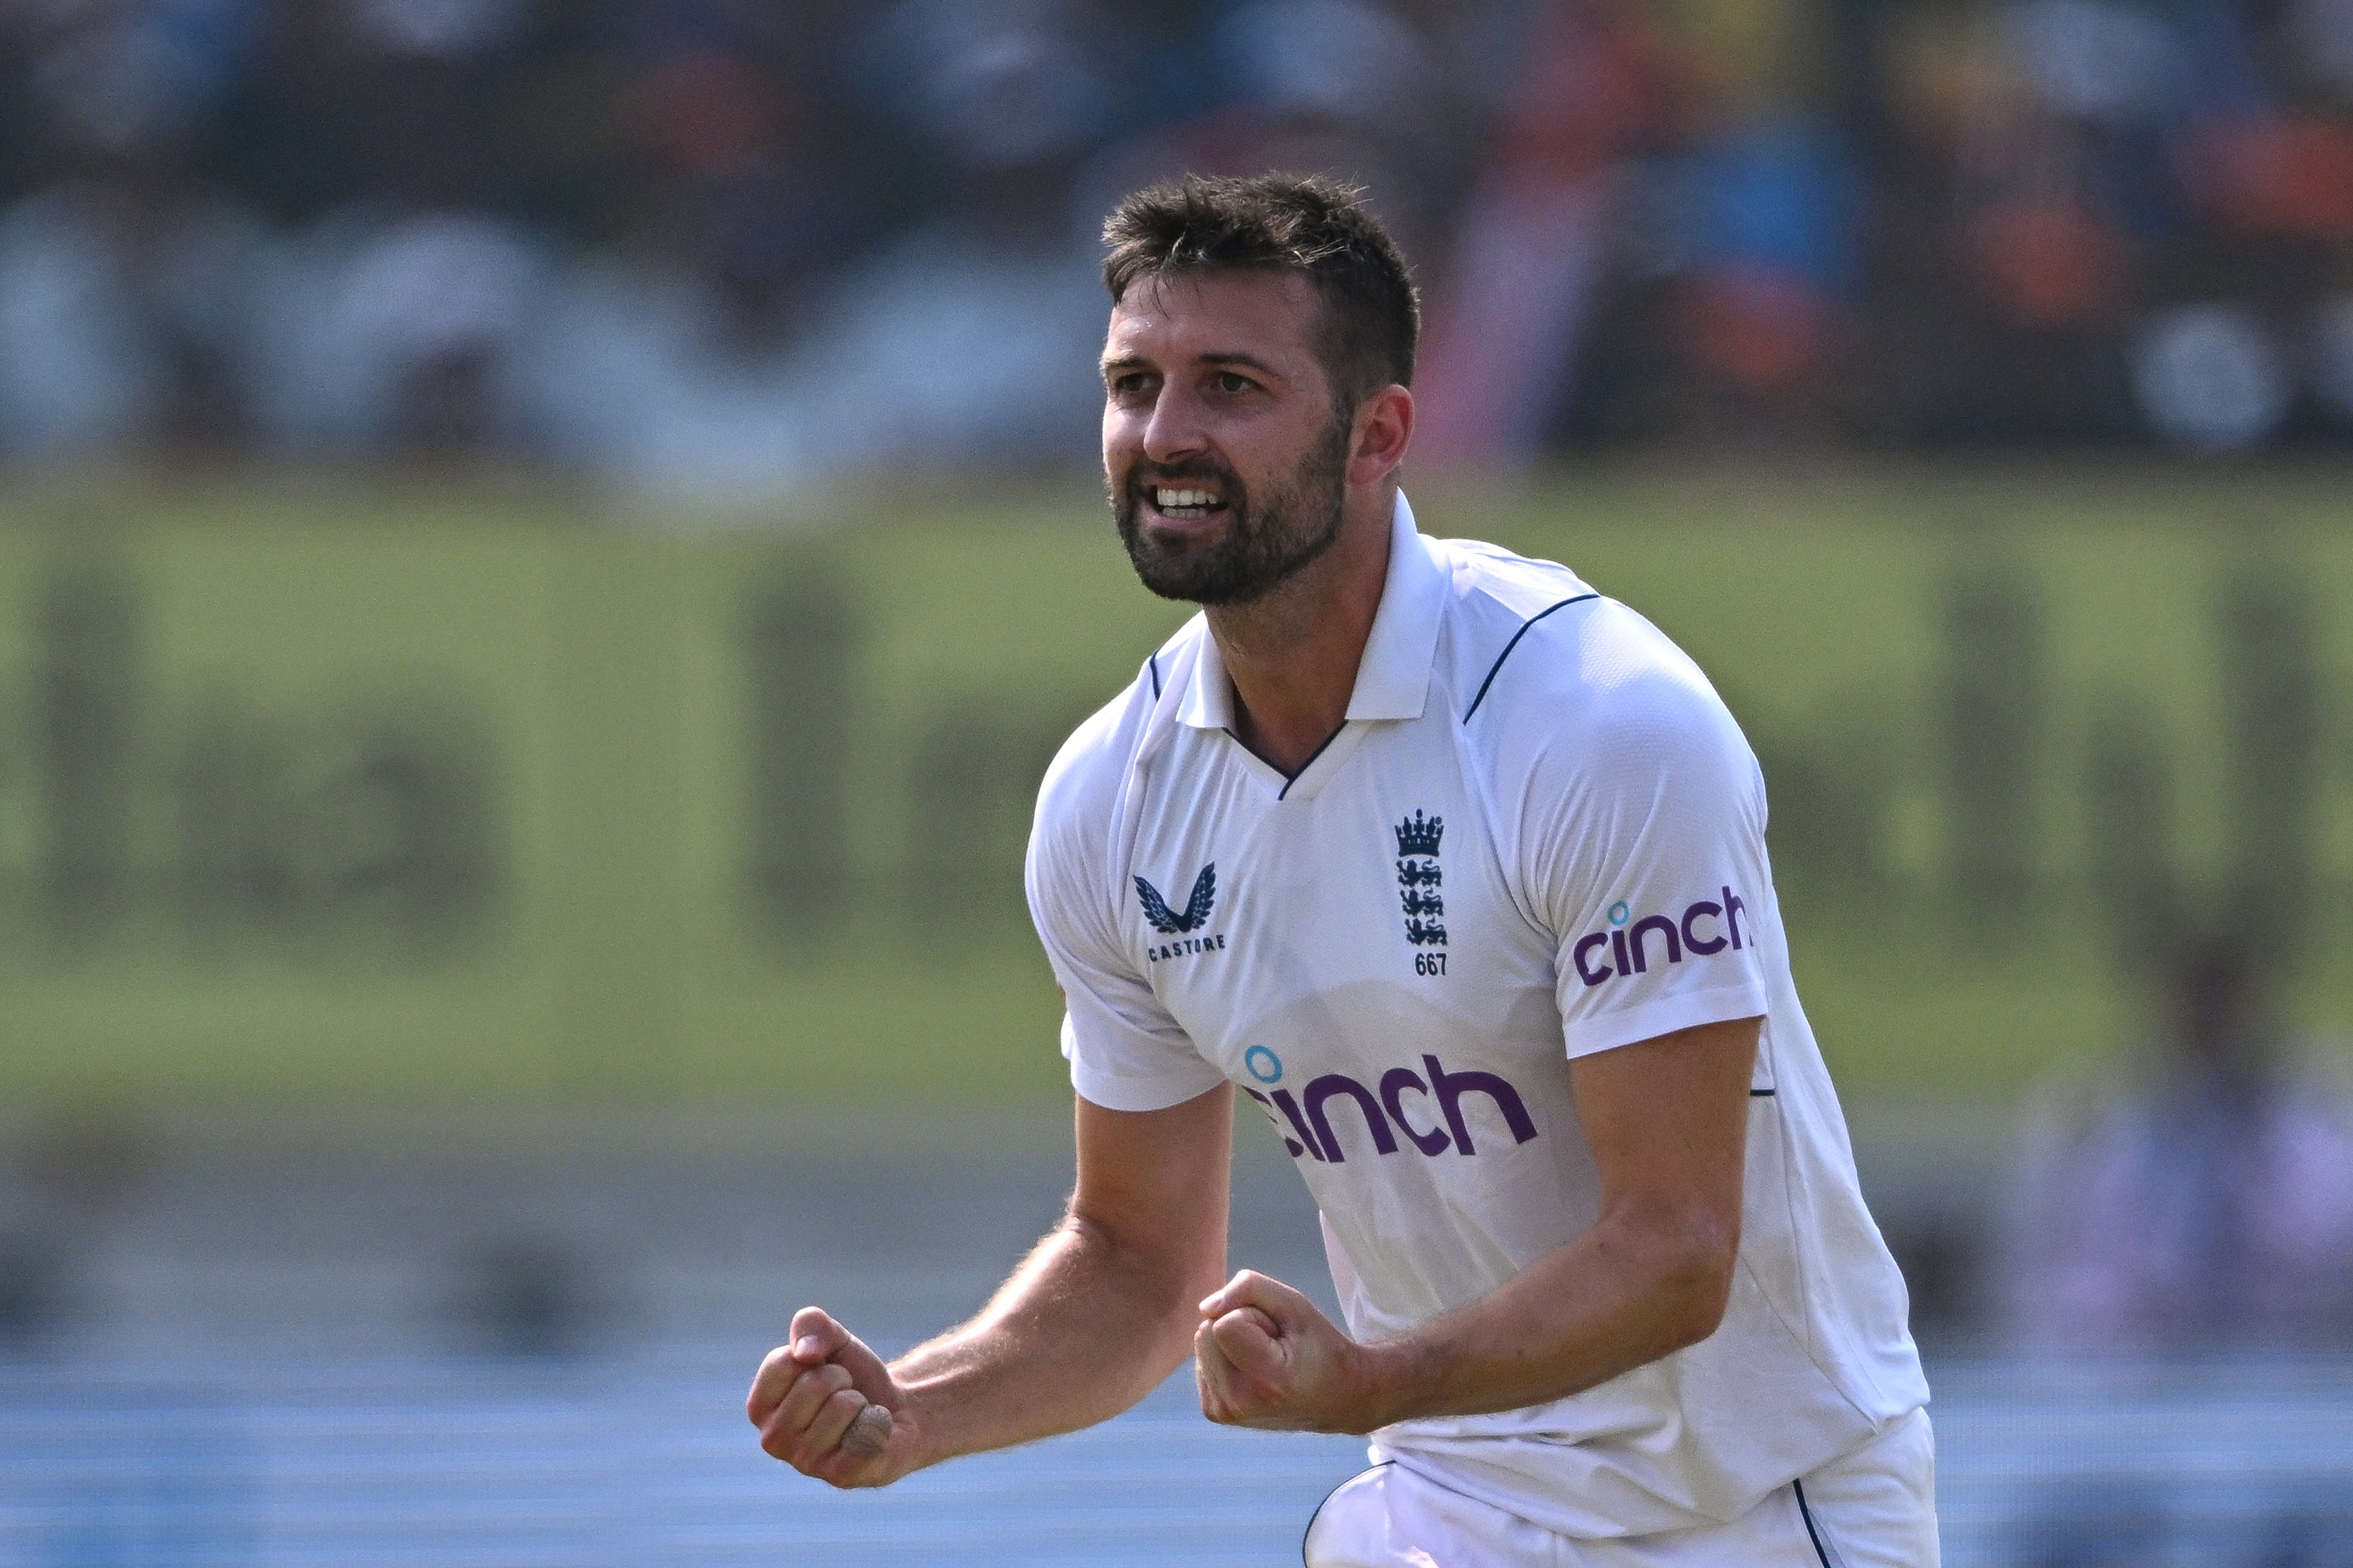 Mark Wood starred for England on the first day of the third Test at Rajkot